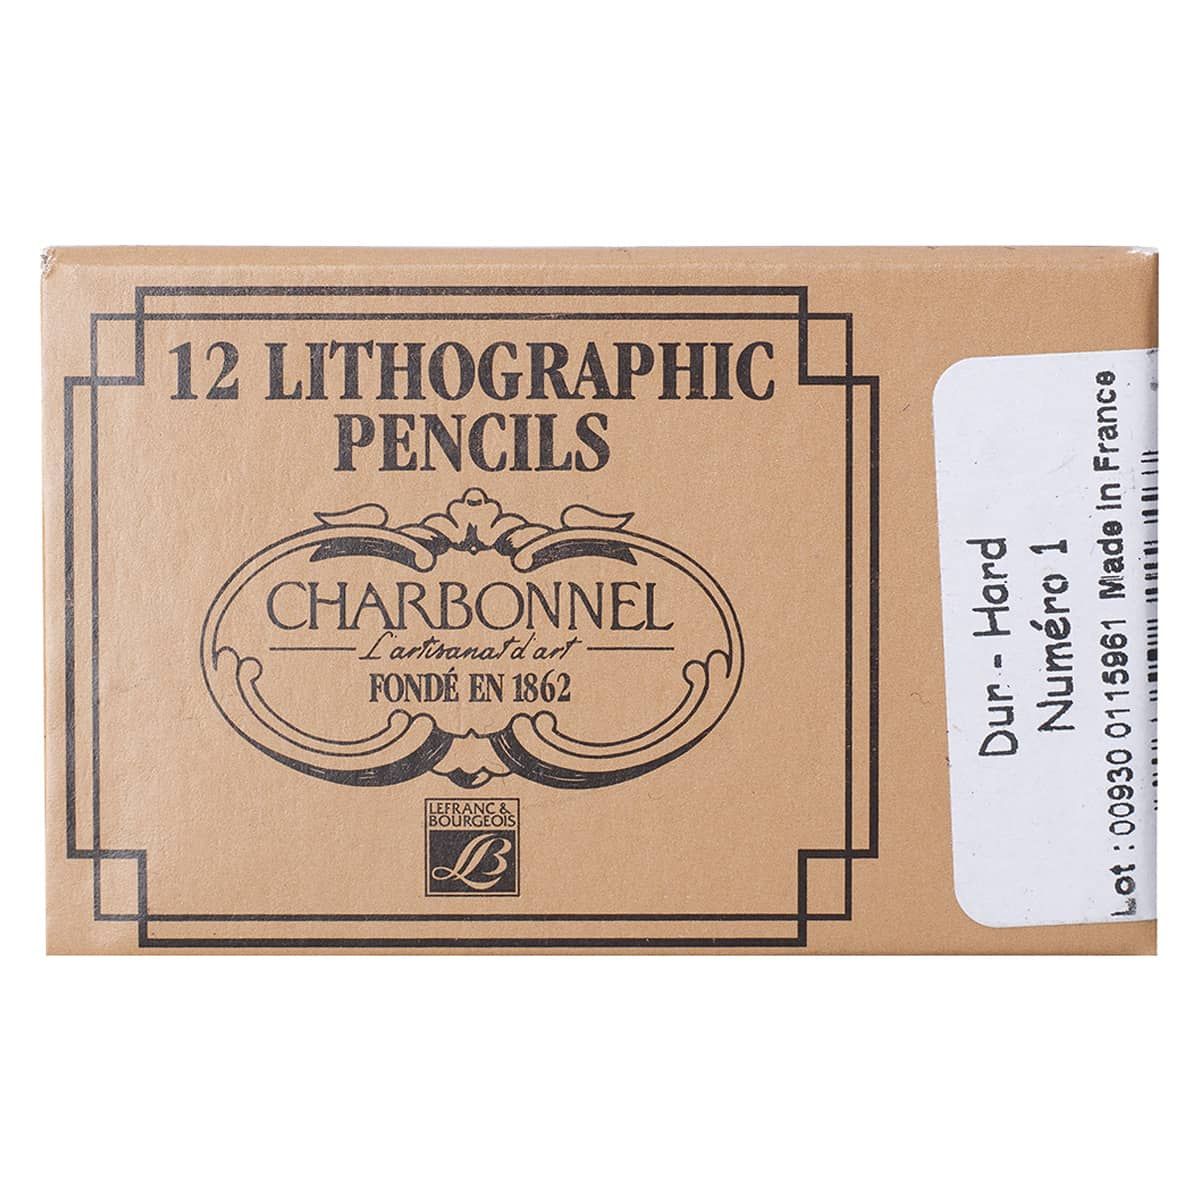 Charbonnel Lithographic Crayon - NO1 Hard Black, 12 Count